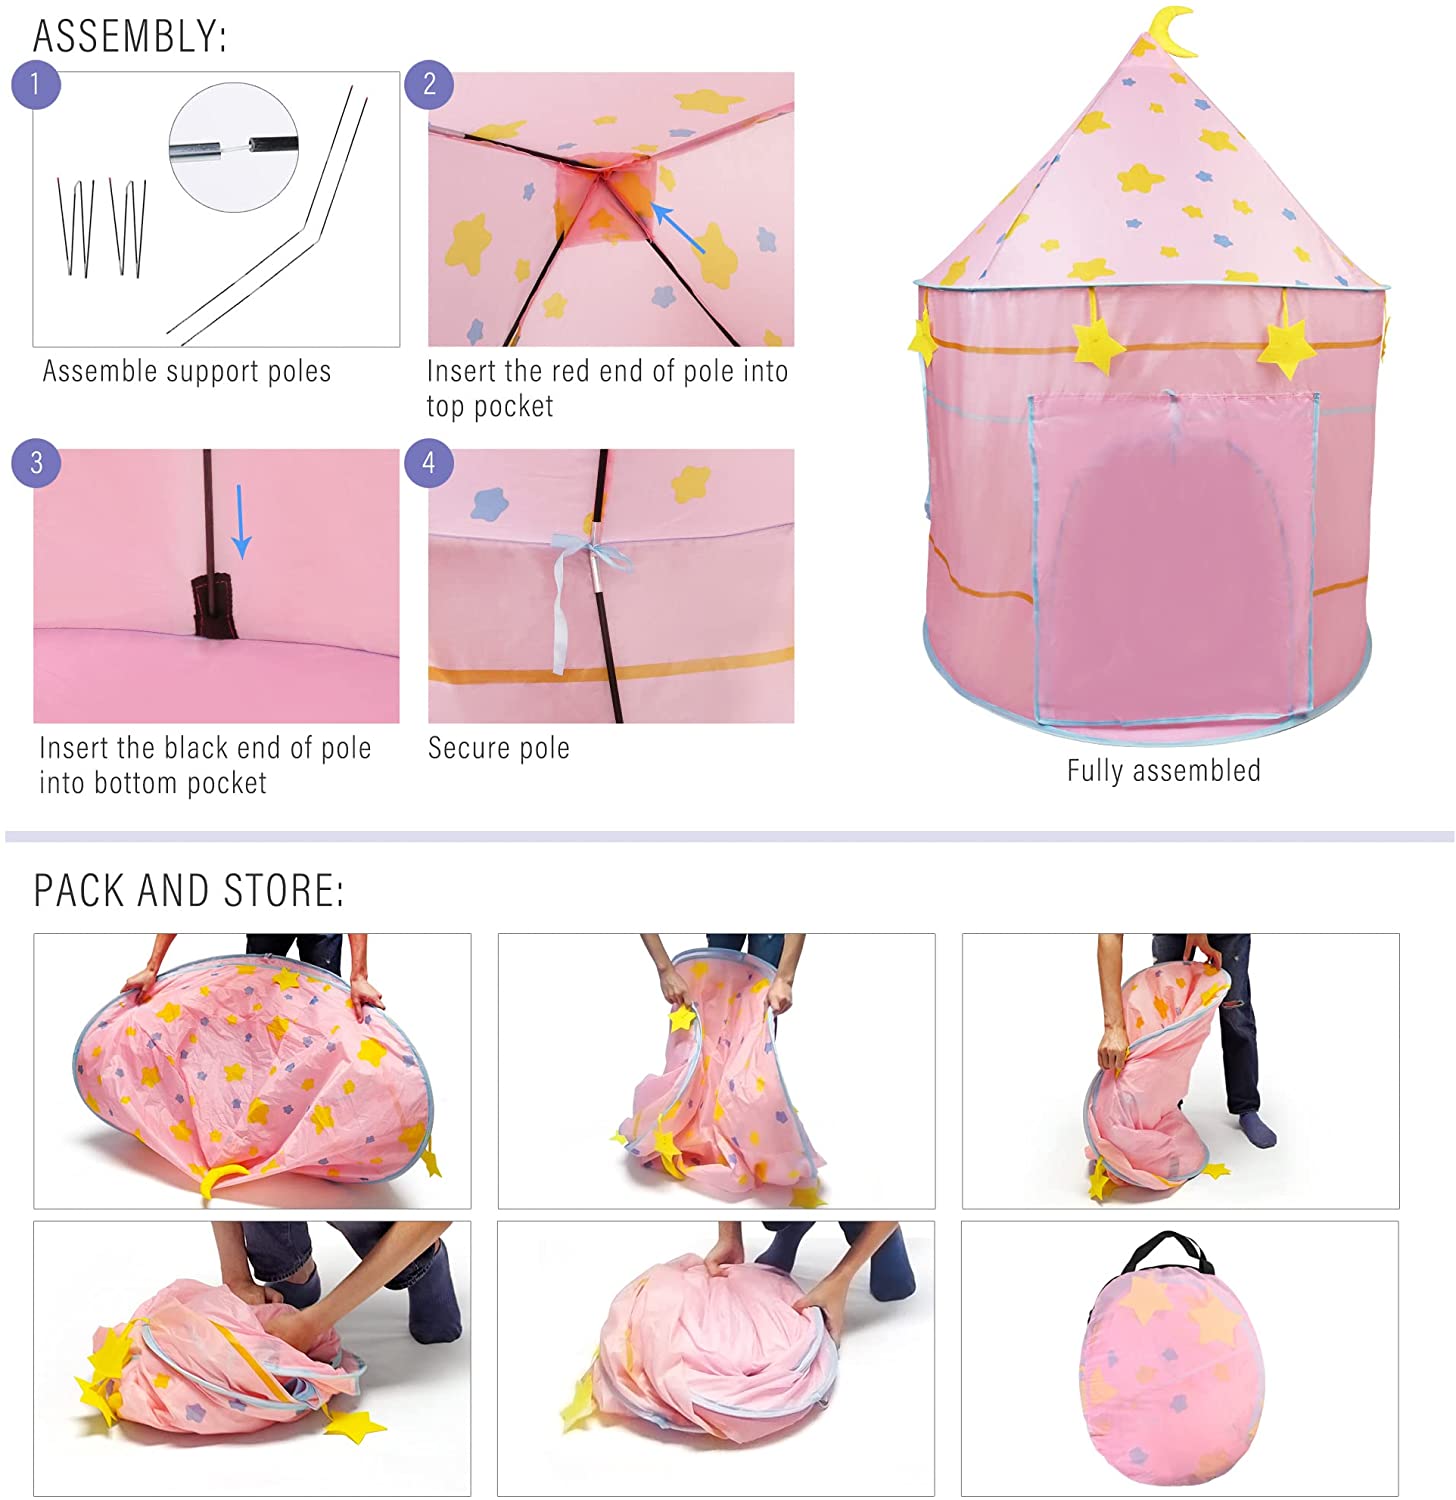 Playtime Foldable Tent House Star Teddy - Pink - Baby Moo